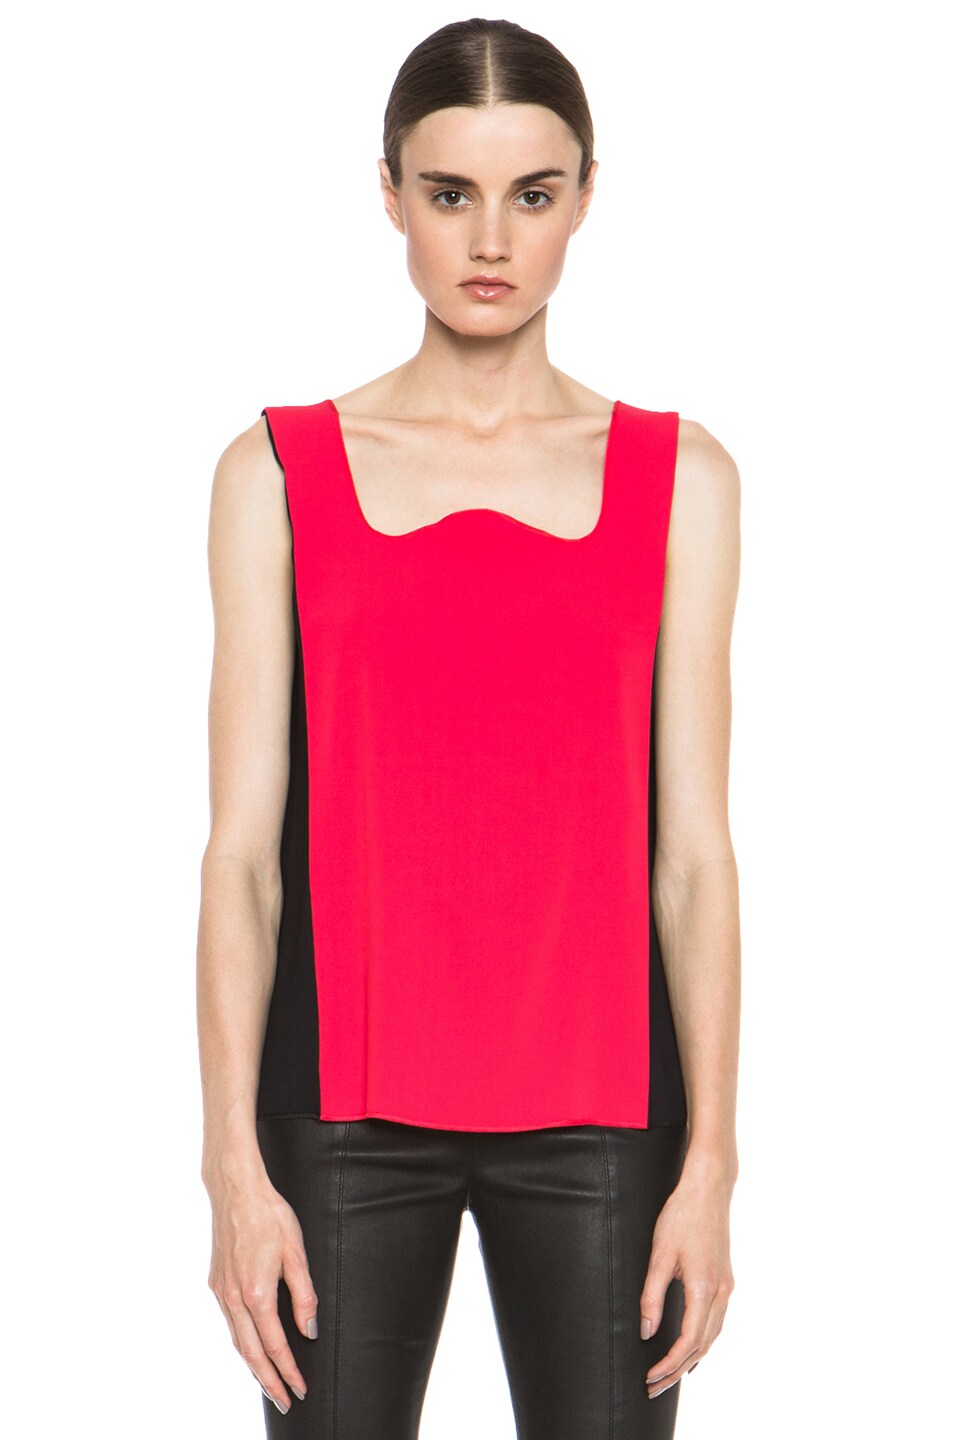 MM6 Maison Margiela Colorblock Poly Tank in Red & Black | FWRD